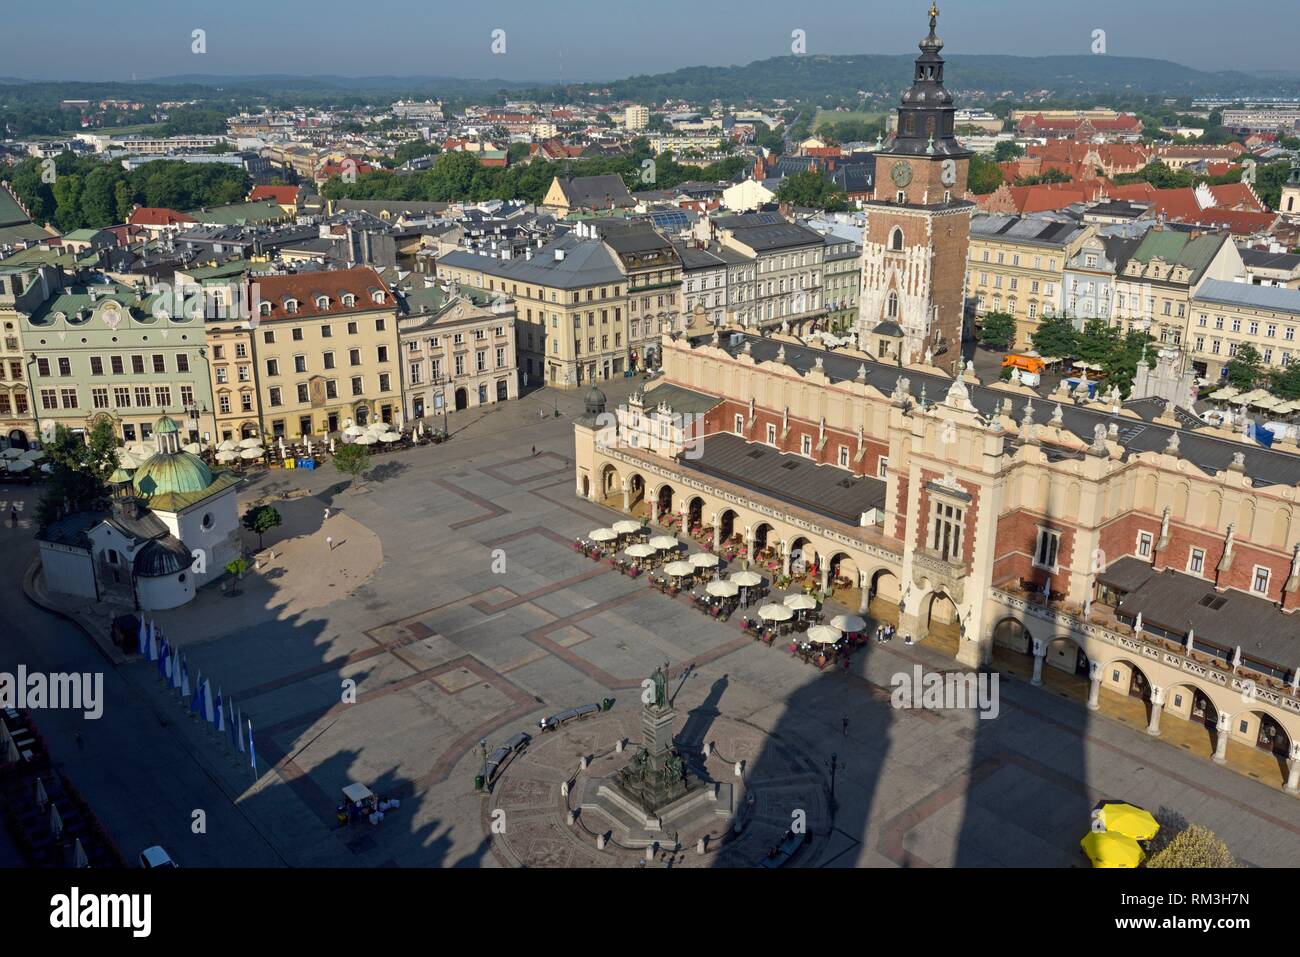 Adam Mickiewicz Monument, the Cloth Hall (Sukiennice) and Town Hall Tower seen from the highest tower of the St. Mary´s Basilica, Rynek Glowny, the Stock Photo